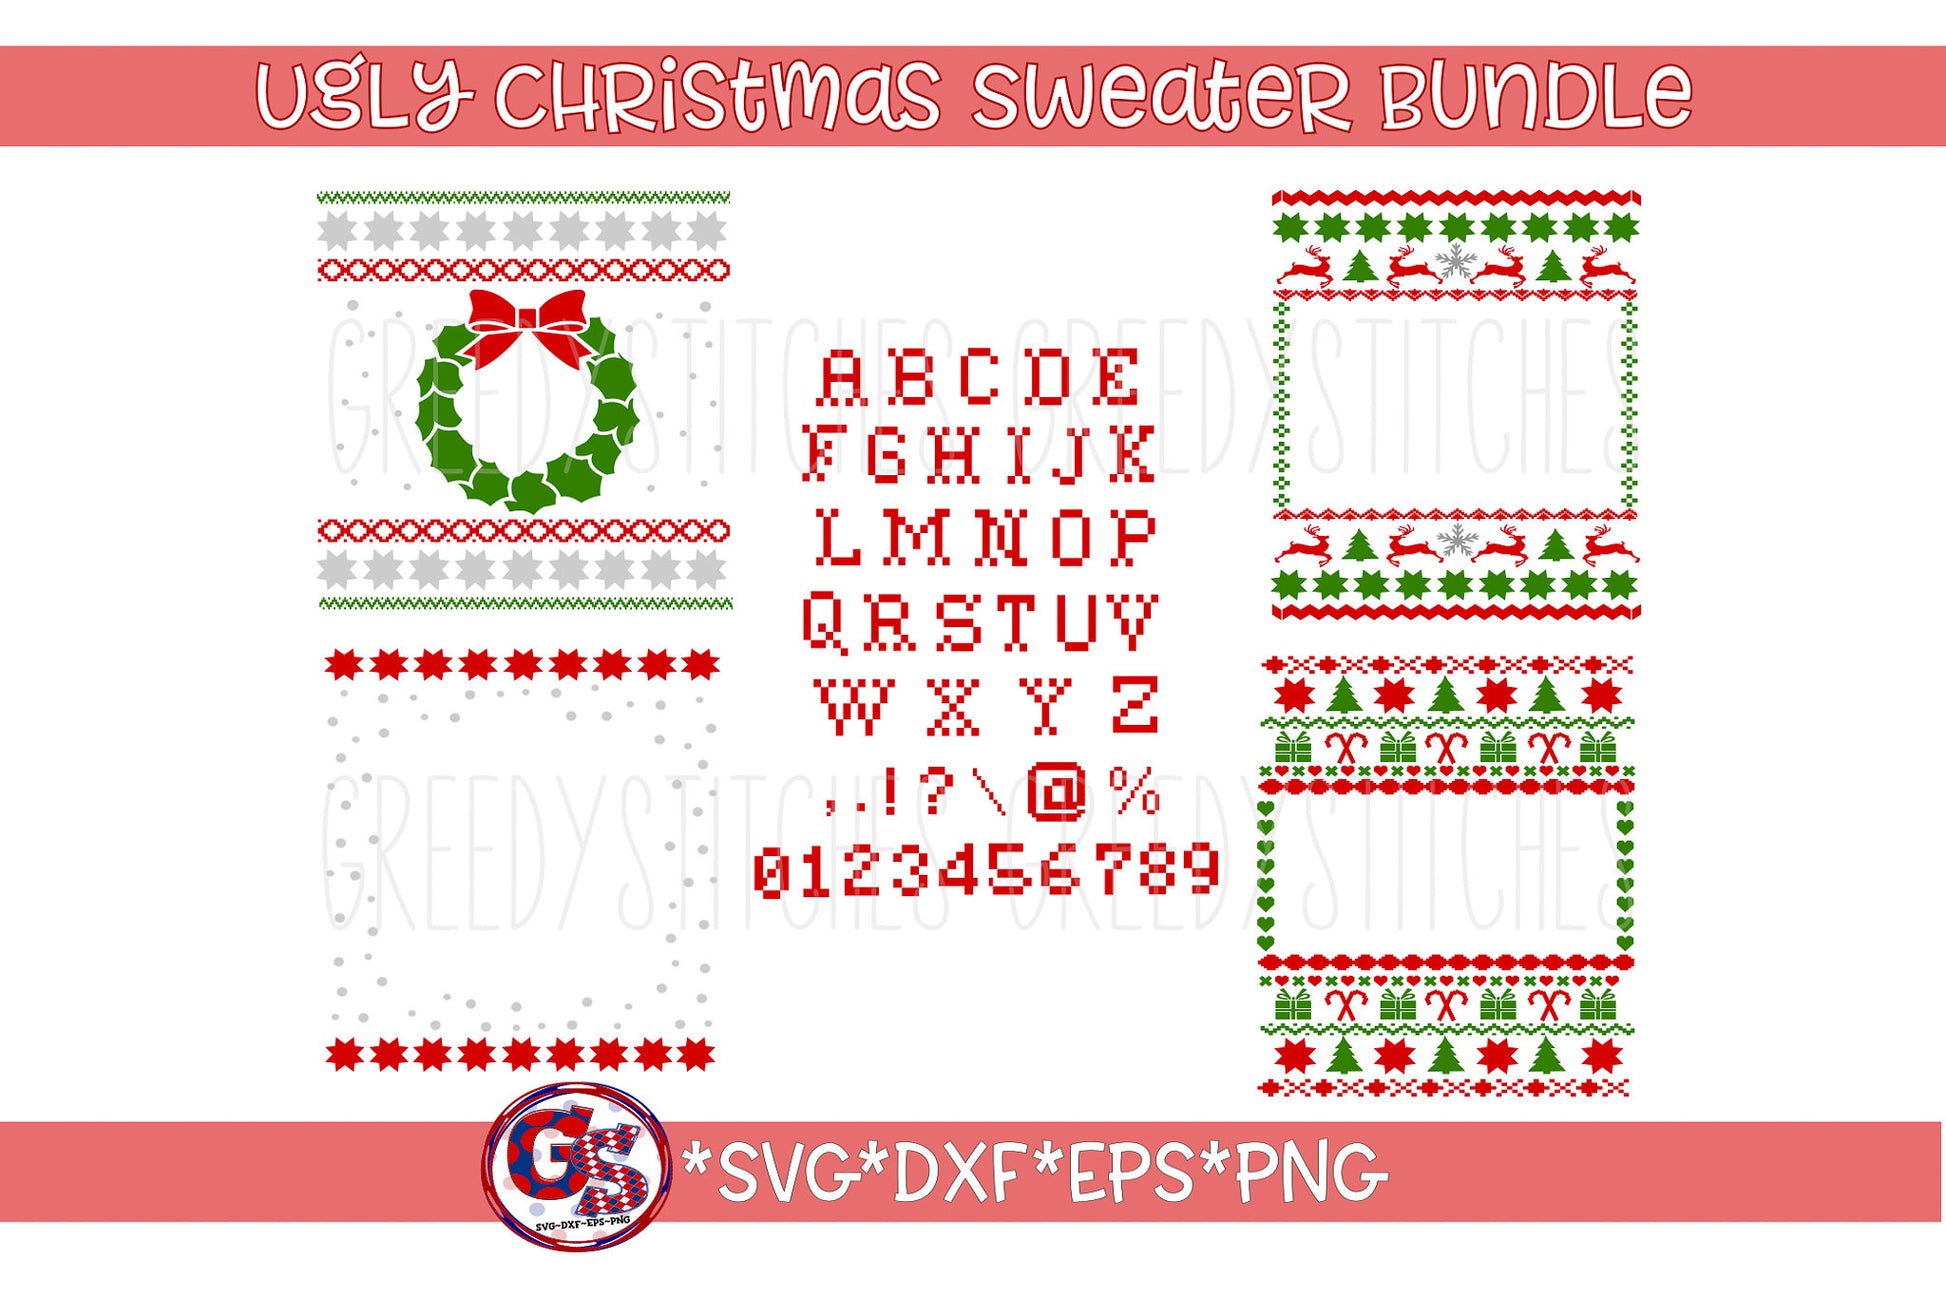 Ugly Christmas Sweater Template Bundle svg, dxf, eps, png. Christmas DxF | Instant Download Cut Files. Christmas DxF | Ugly Sweater SvG